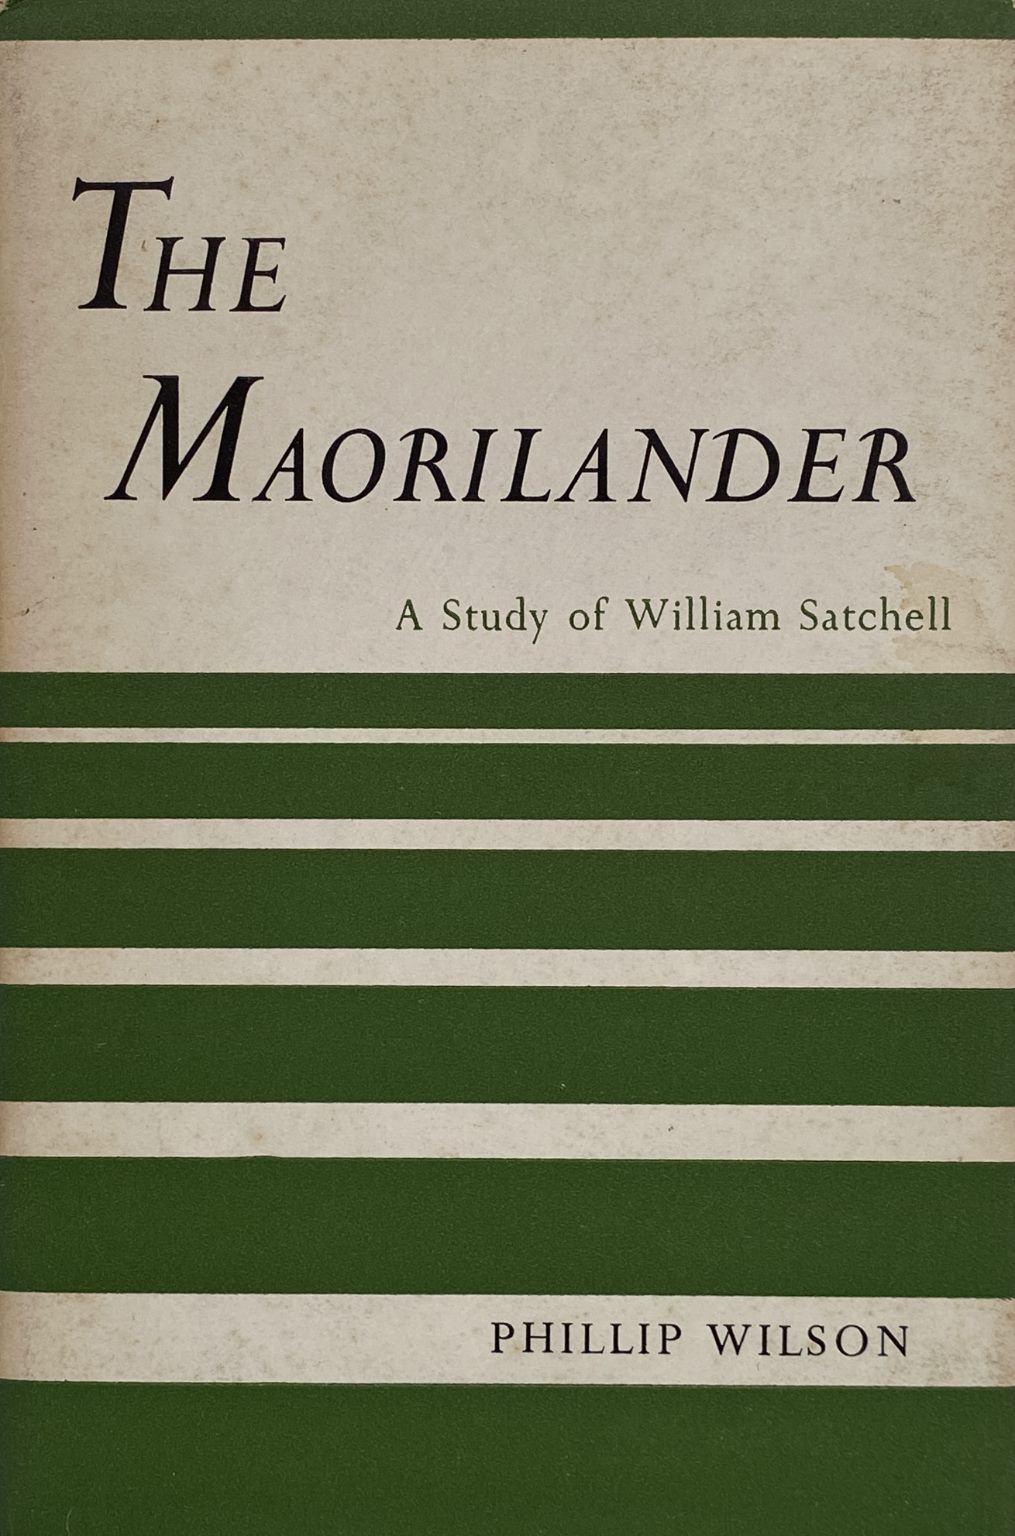 THE MAORILANDER: A Study of William Satchell